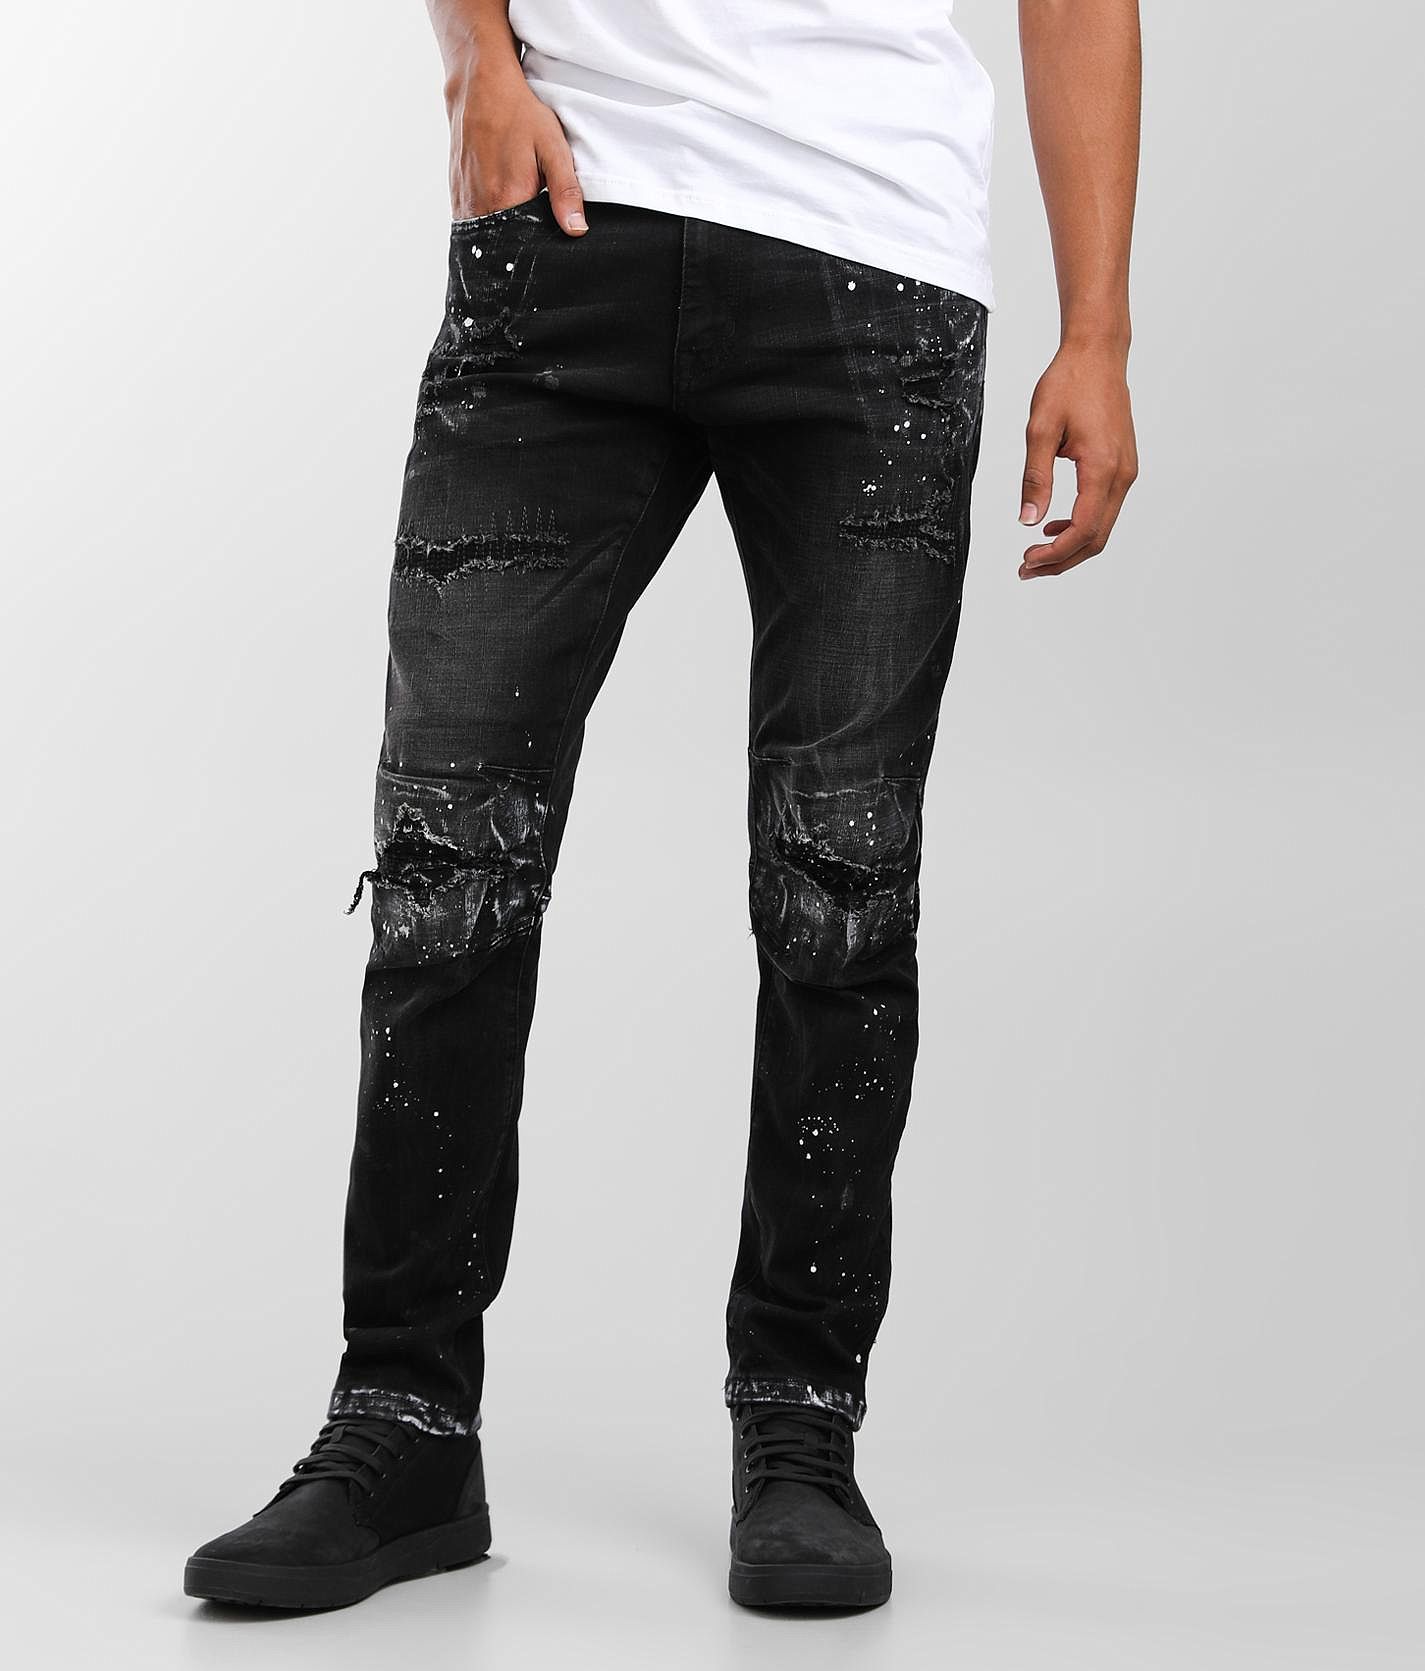 NEW manually #017 LV 61´s TAPERED JEANS-